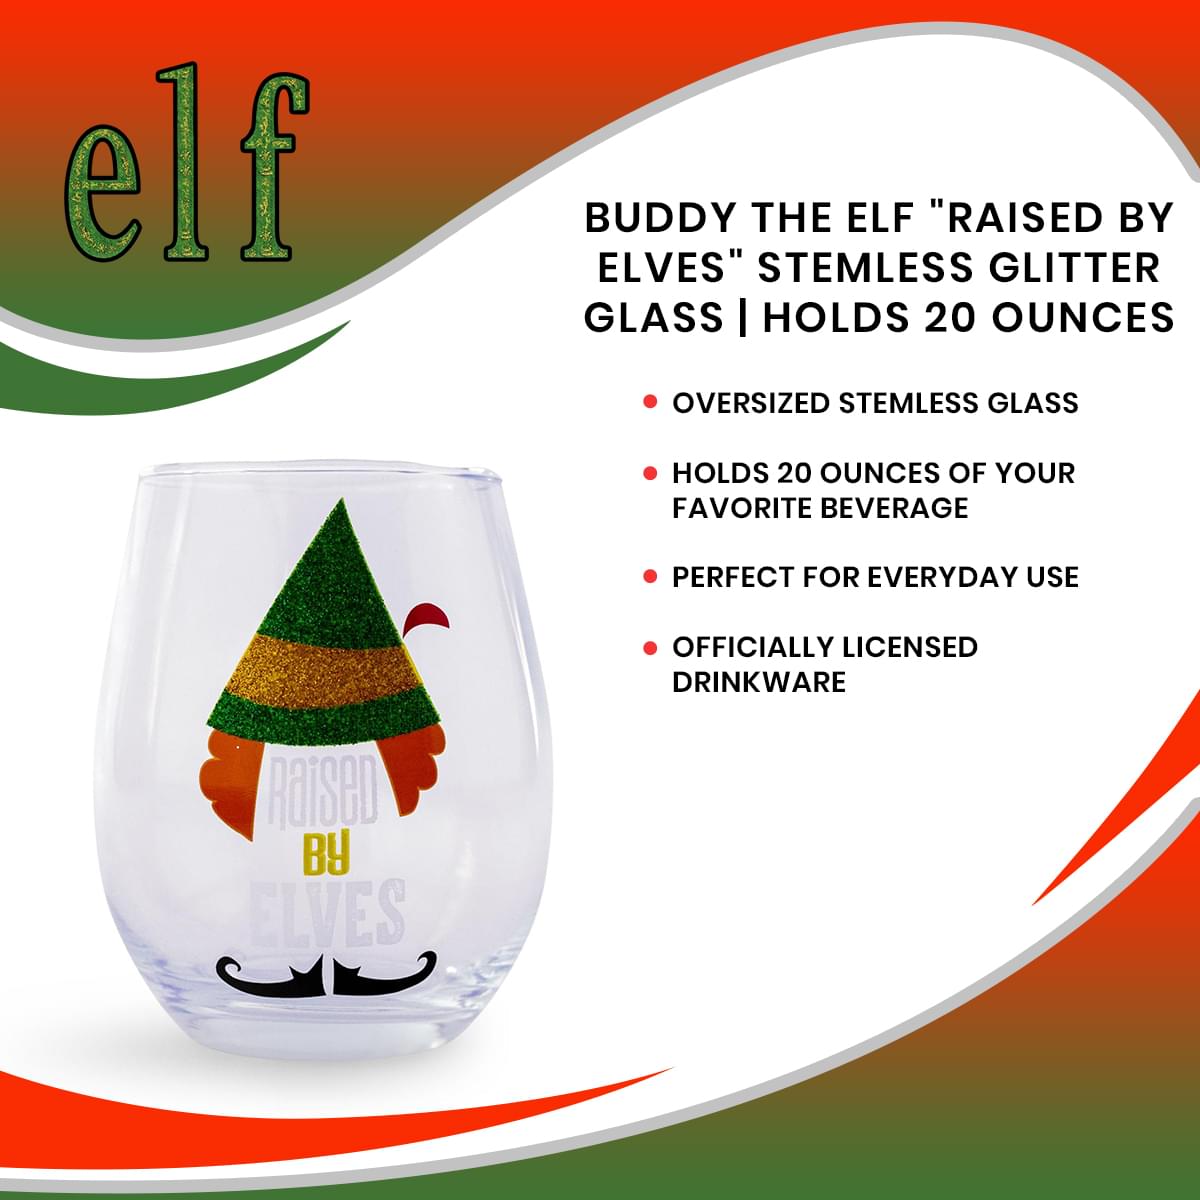 Buddy the Elf "Raised By Elves" Stemless Glitter Glass | Holds 20 Ounces